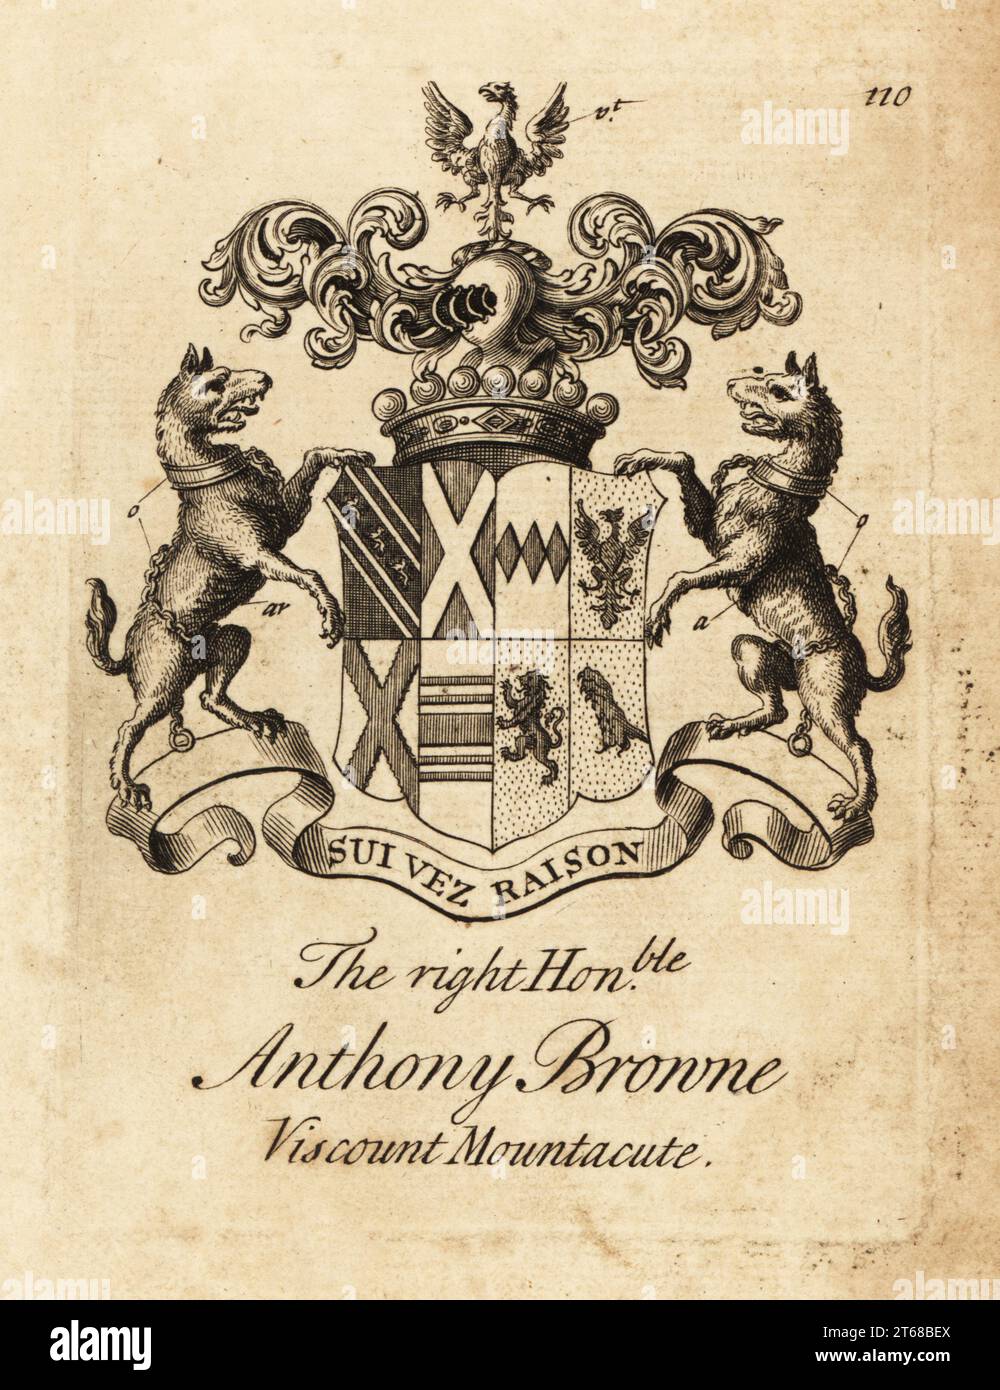 Coat of arms of the Right Honourable Anthony Browne, Viscount Mountacute or Viscount Montagu. Copperplate engraving by Andrew Johnston after C. Gardiner from Notitia Anglicana, Shewing the Achievements of all the English Nobility, Andrew Johnson, the Strand, London, 1724. Stock Photo